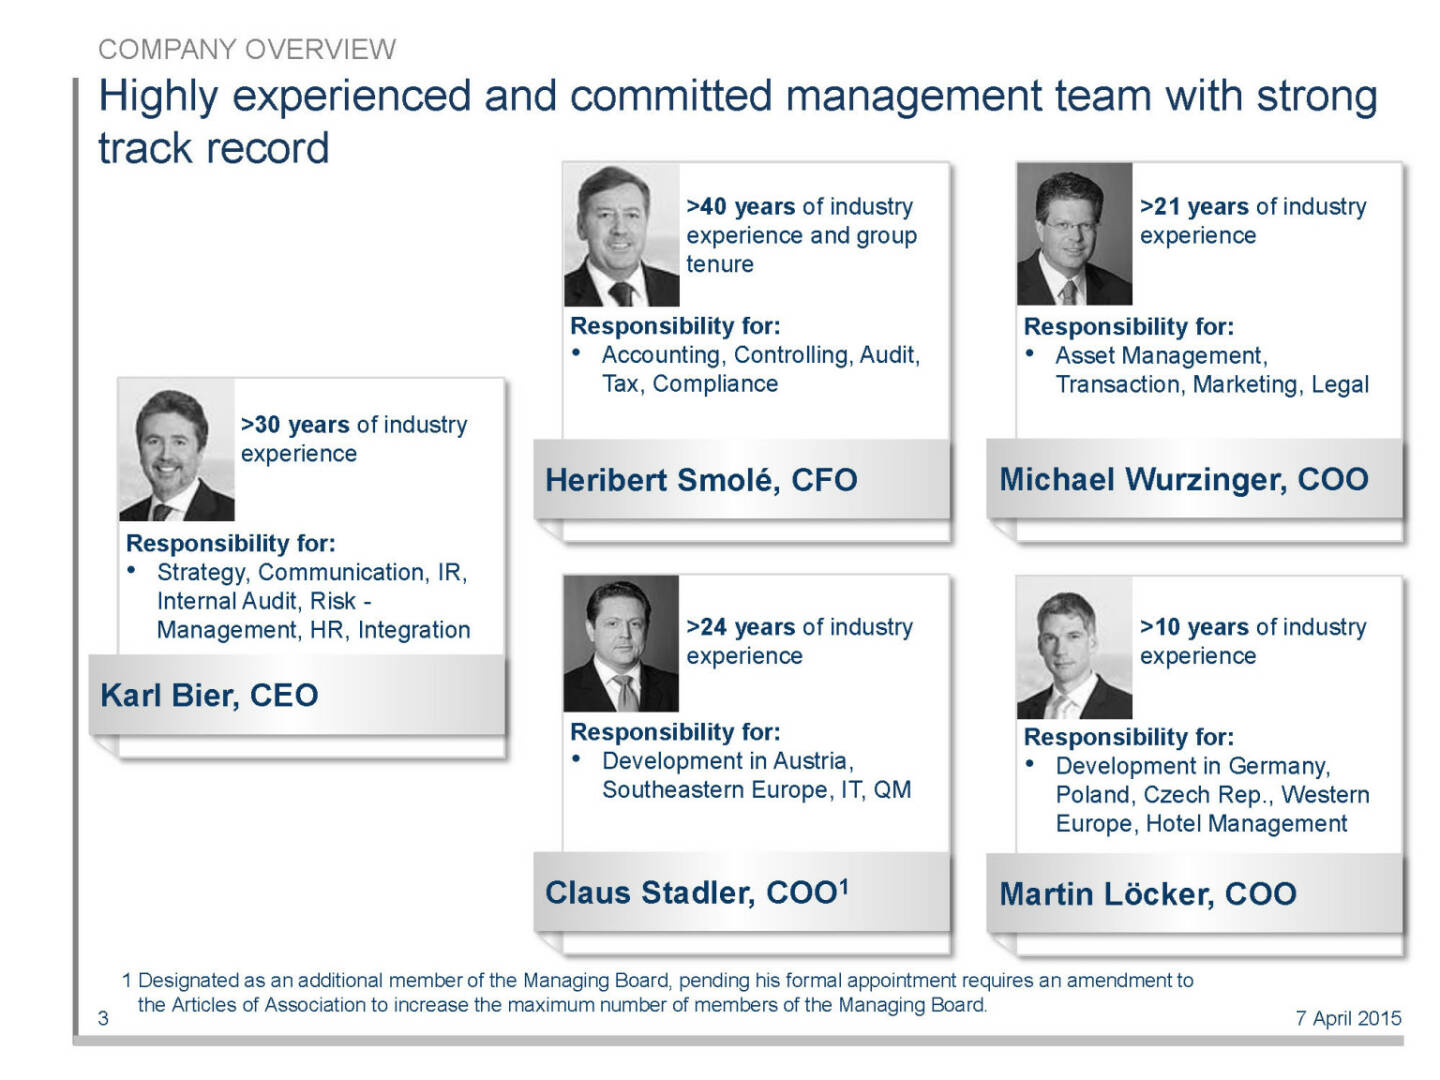 Highly experienced and committed management team with strong track record